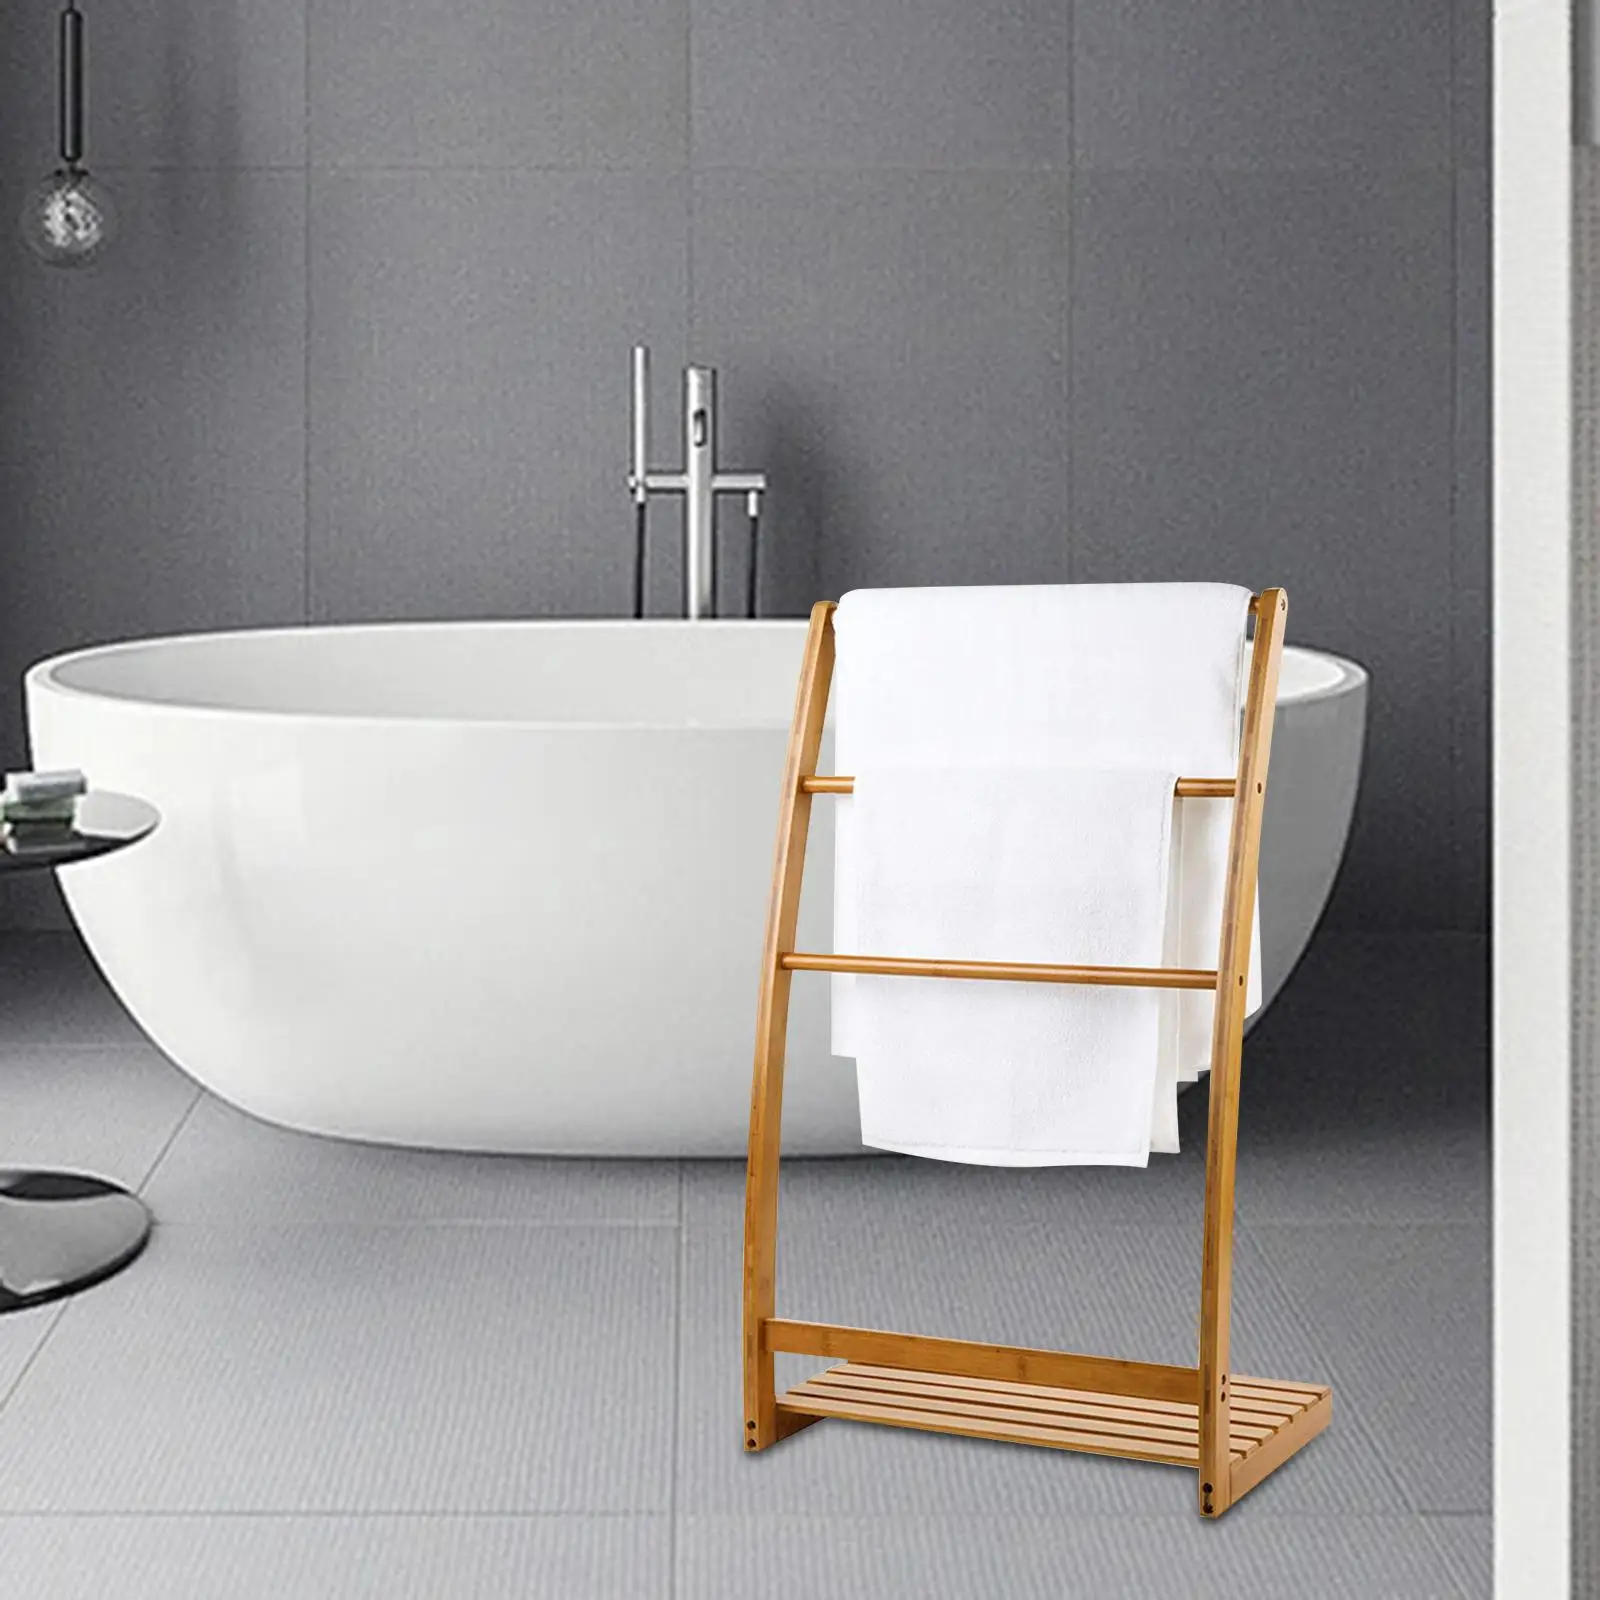 Rustic Bamboo Bathroom Towel Drying Stand Holder Bathroom Towel Stand Free Standing Blanket Rack for Hand Towel Washcloth